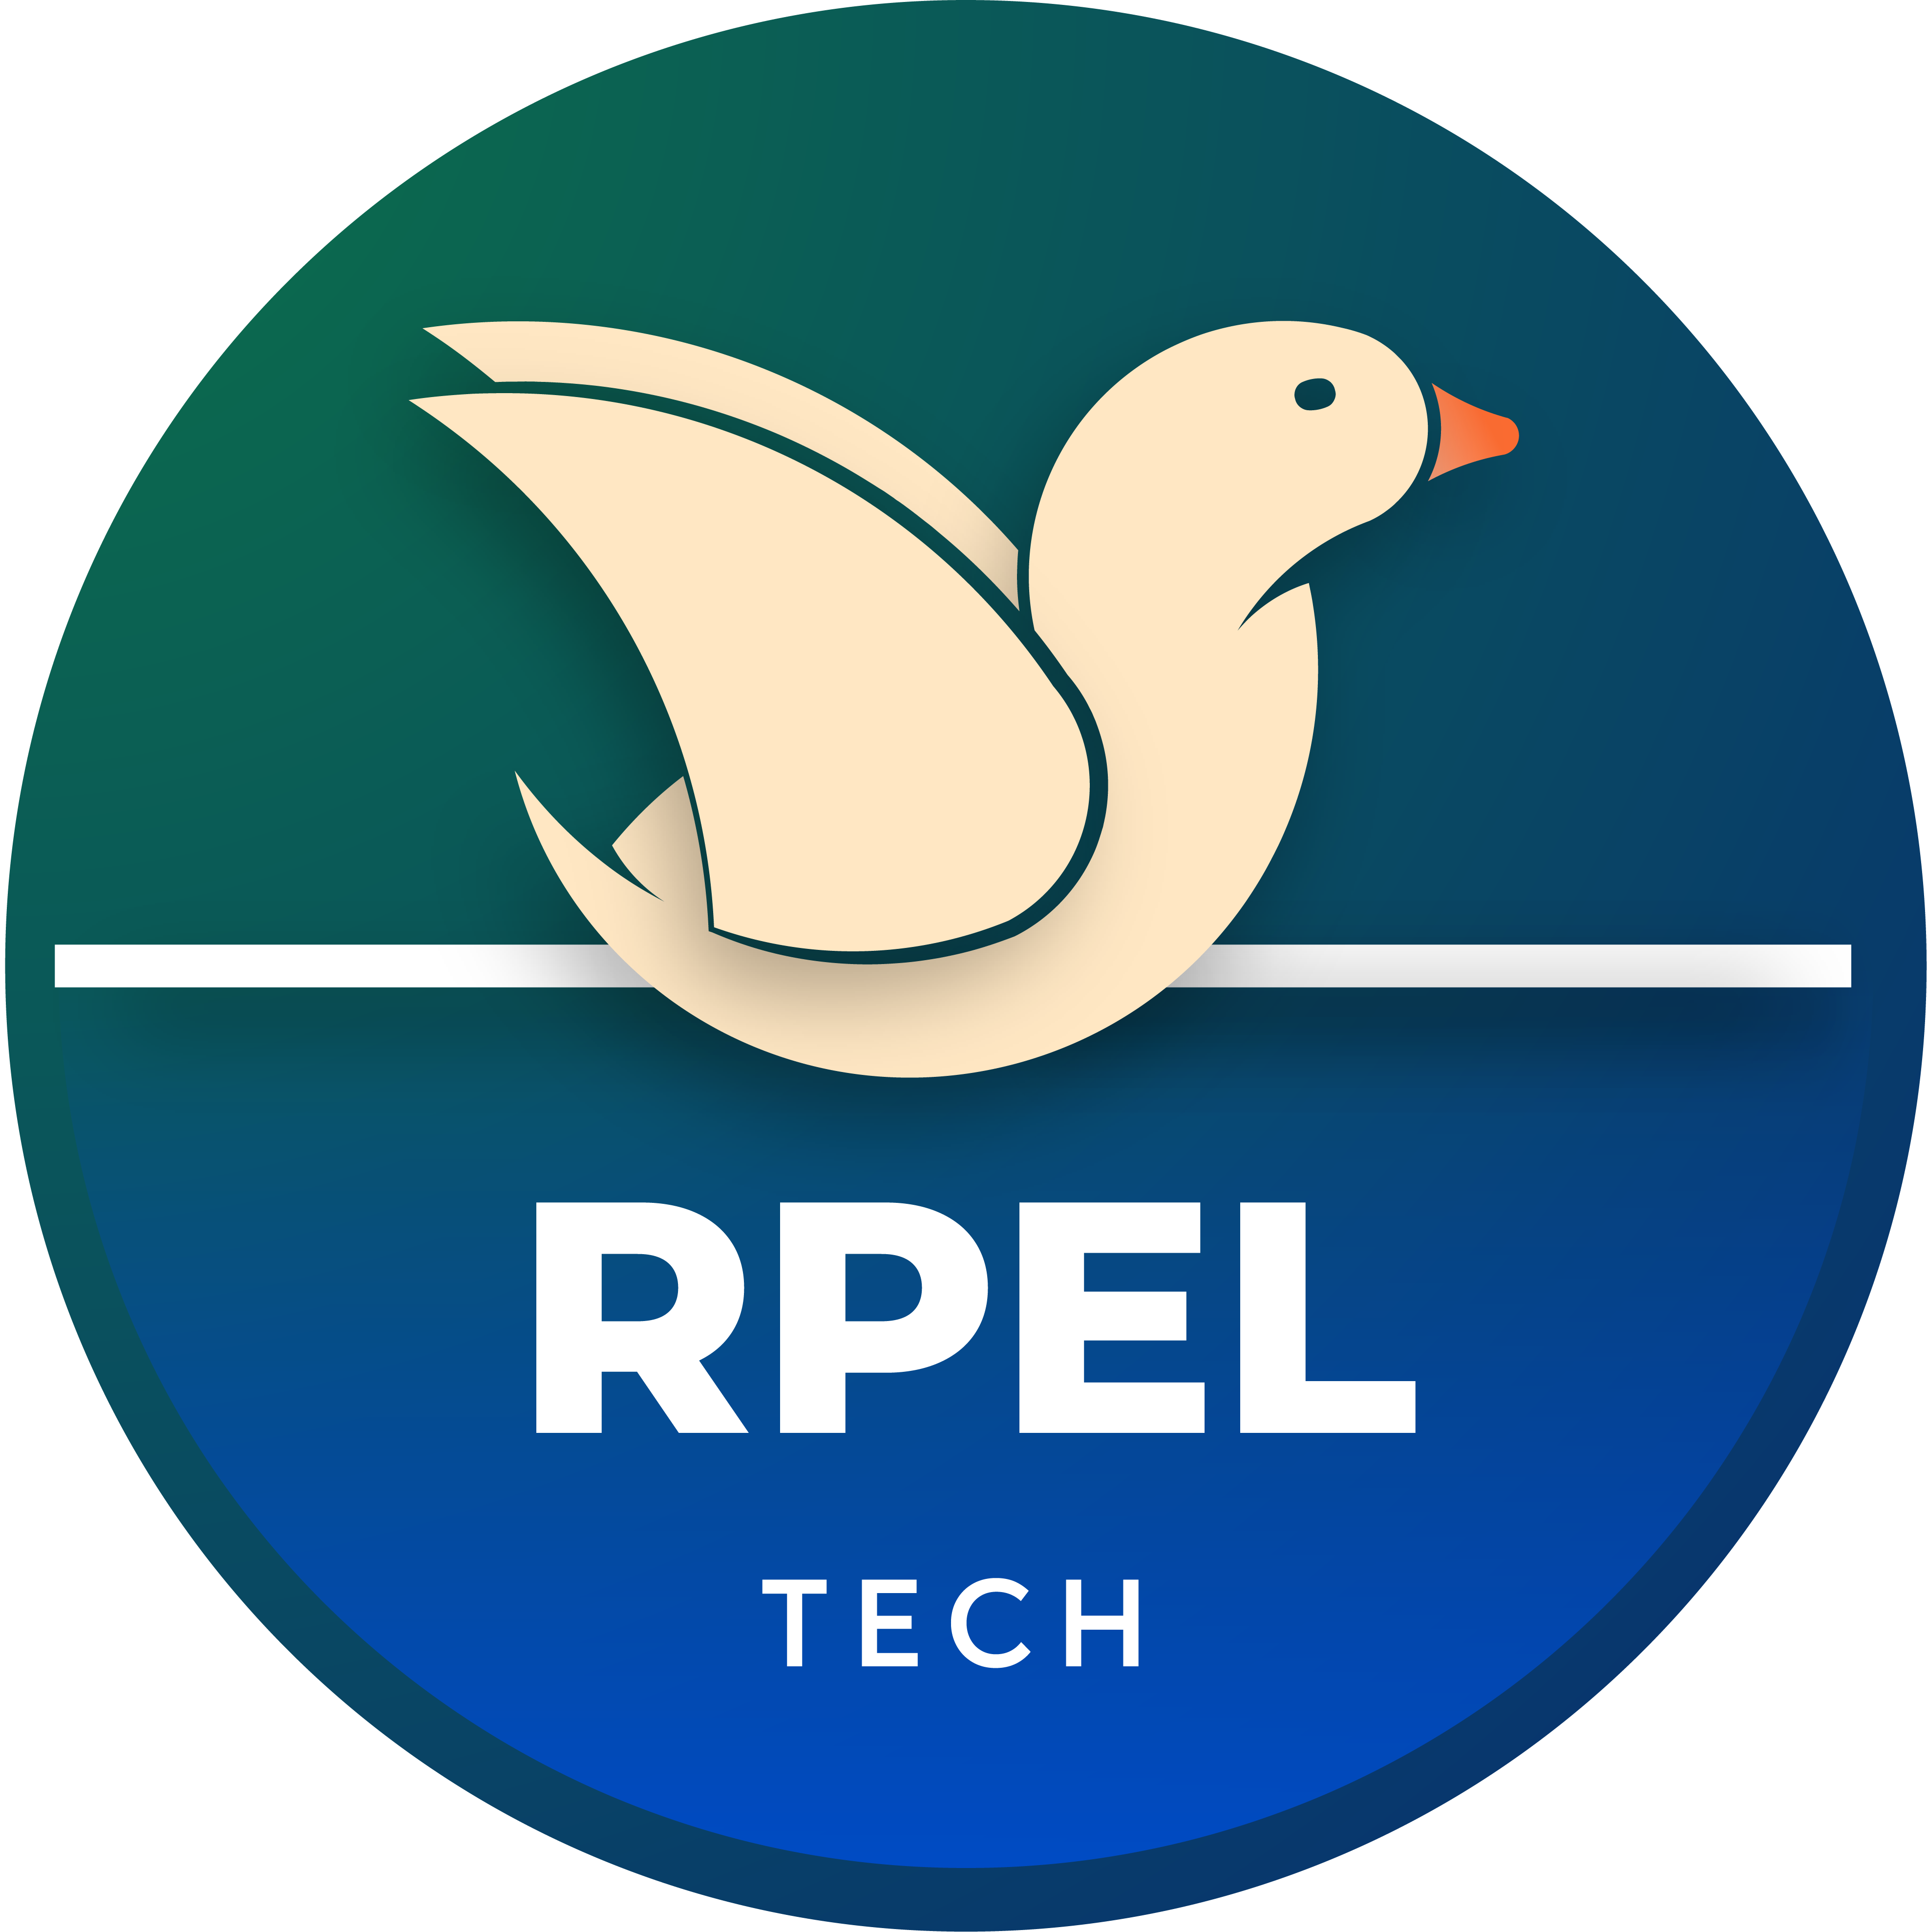 Circular logo of the tech branche of the RPEL GmbH (beige drake with orange beak and blue fadeout)